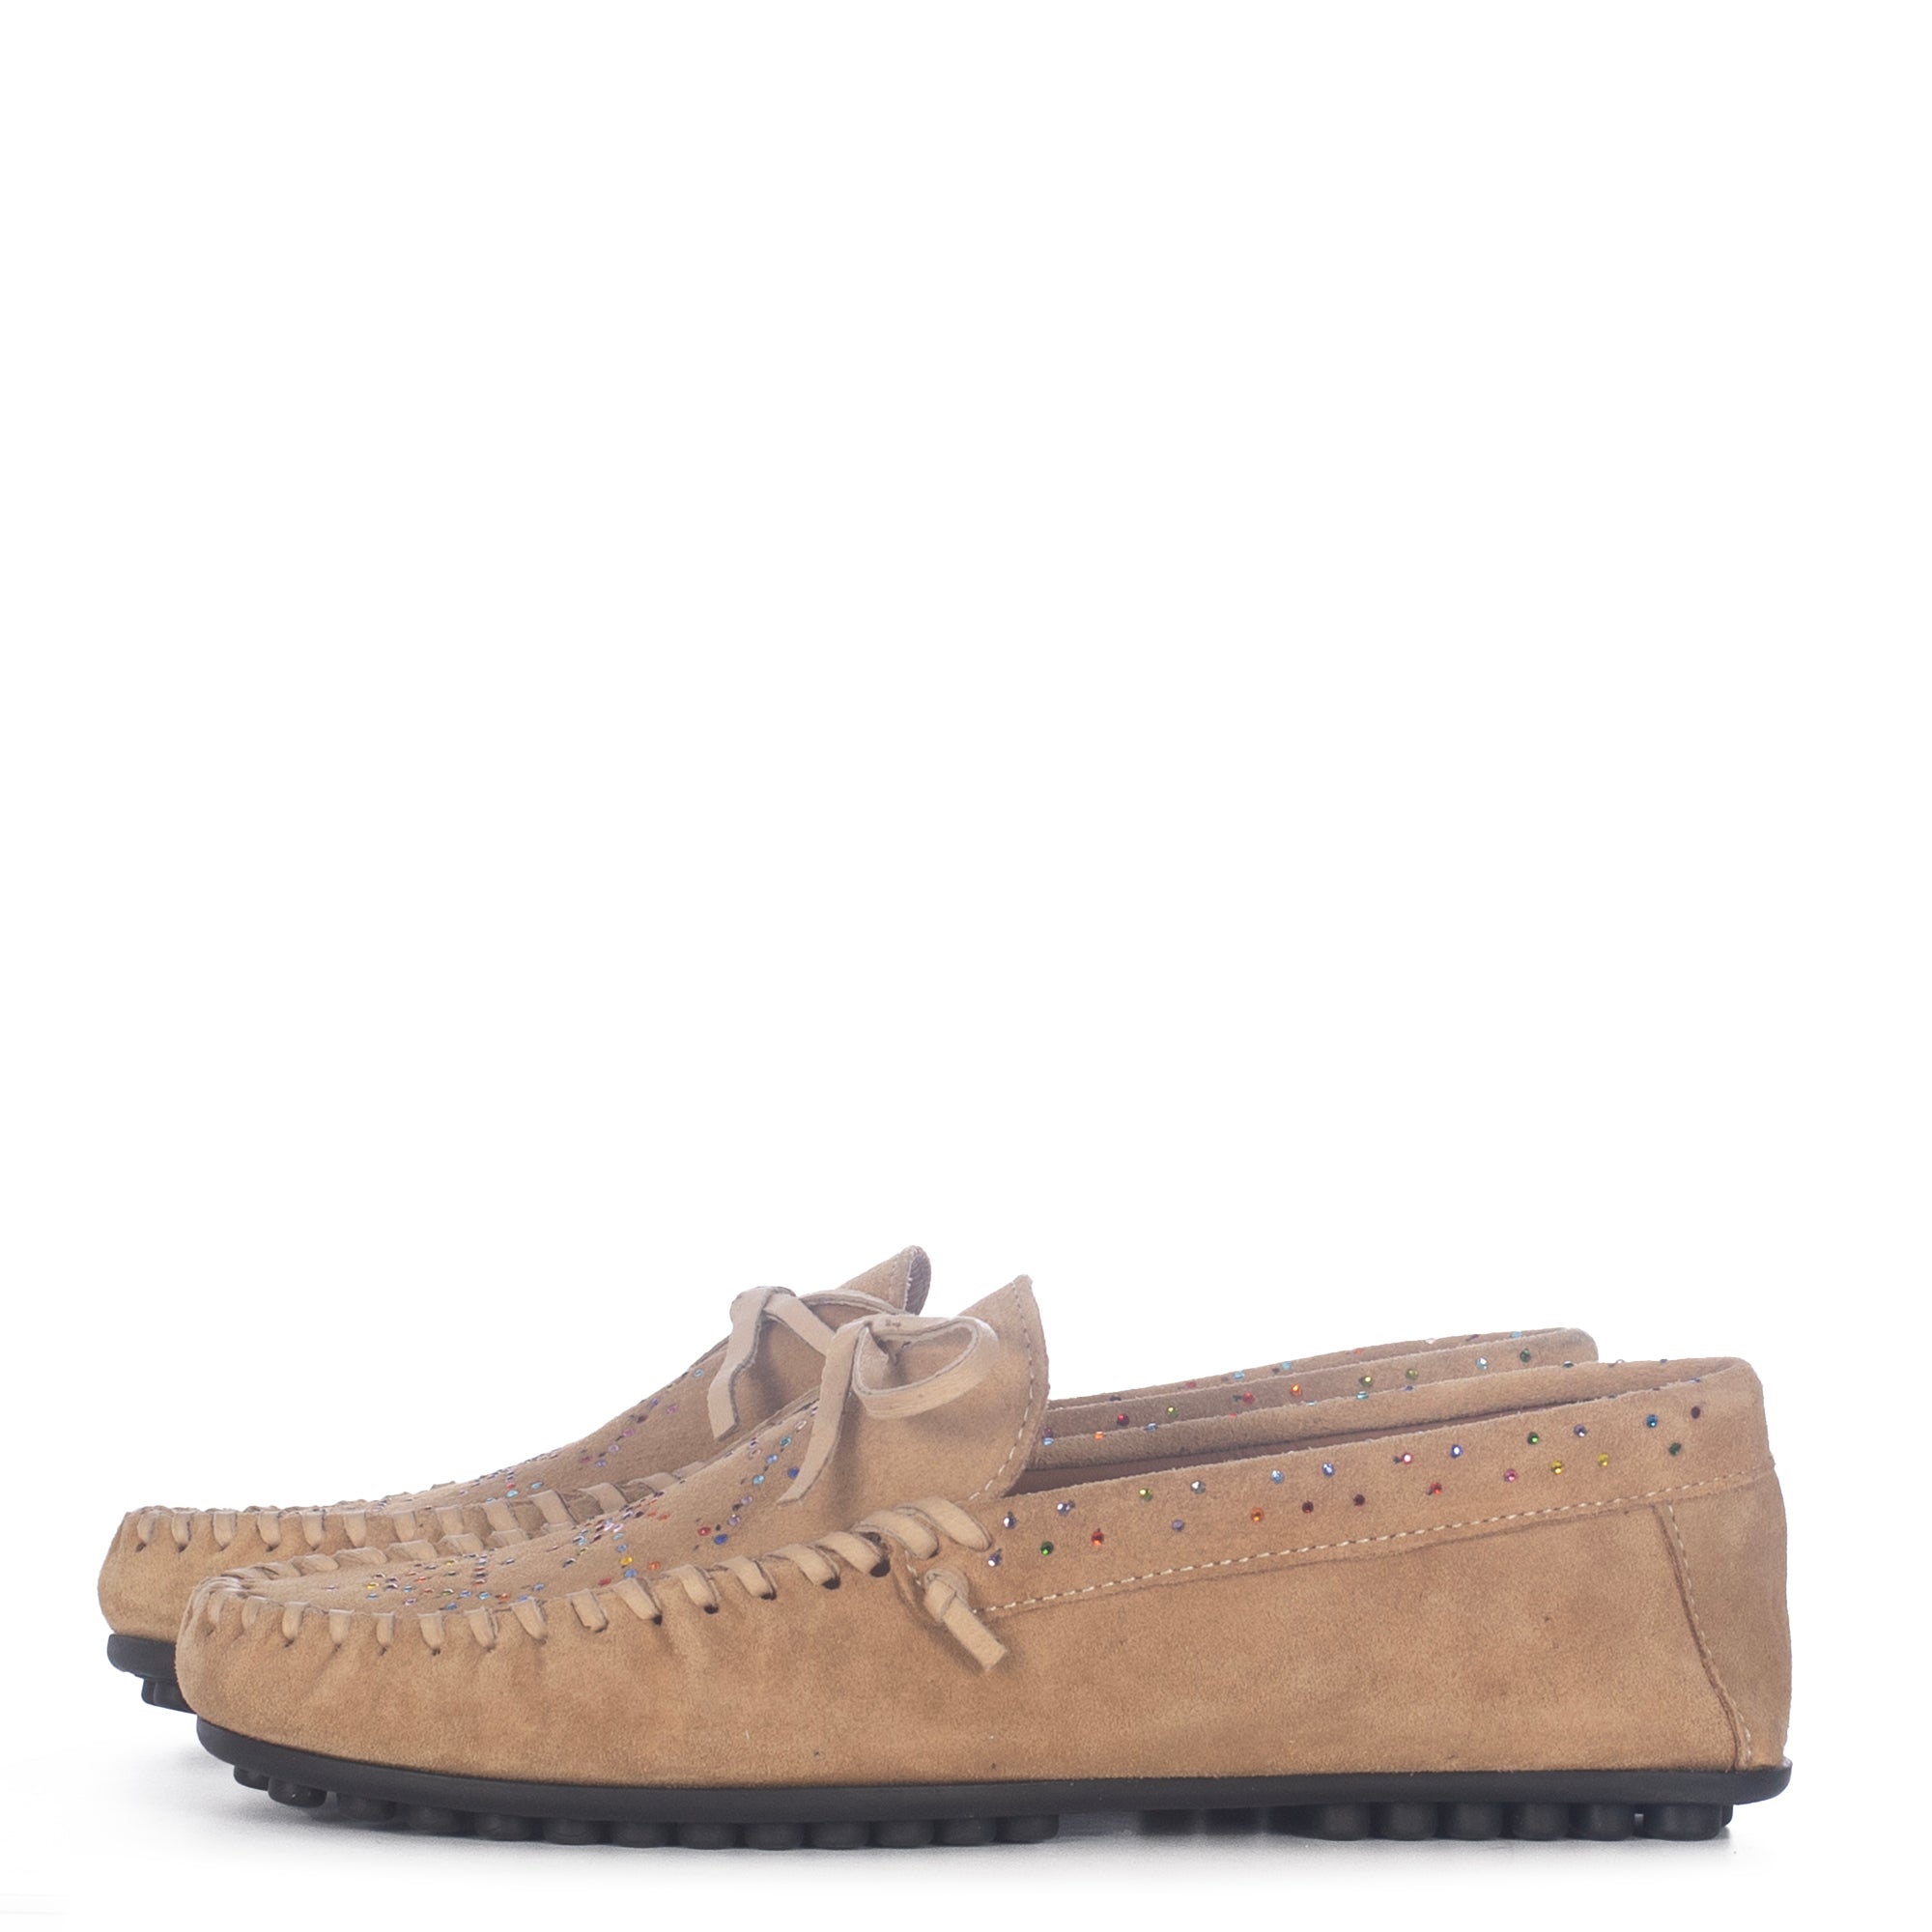 QUECHUA SAND LOAFERS MULTICOLORED STRASS